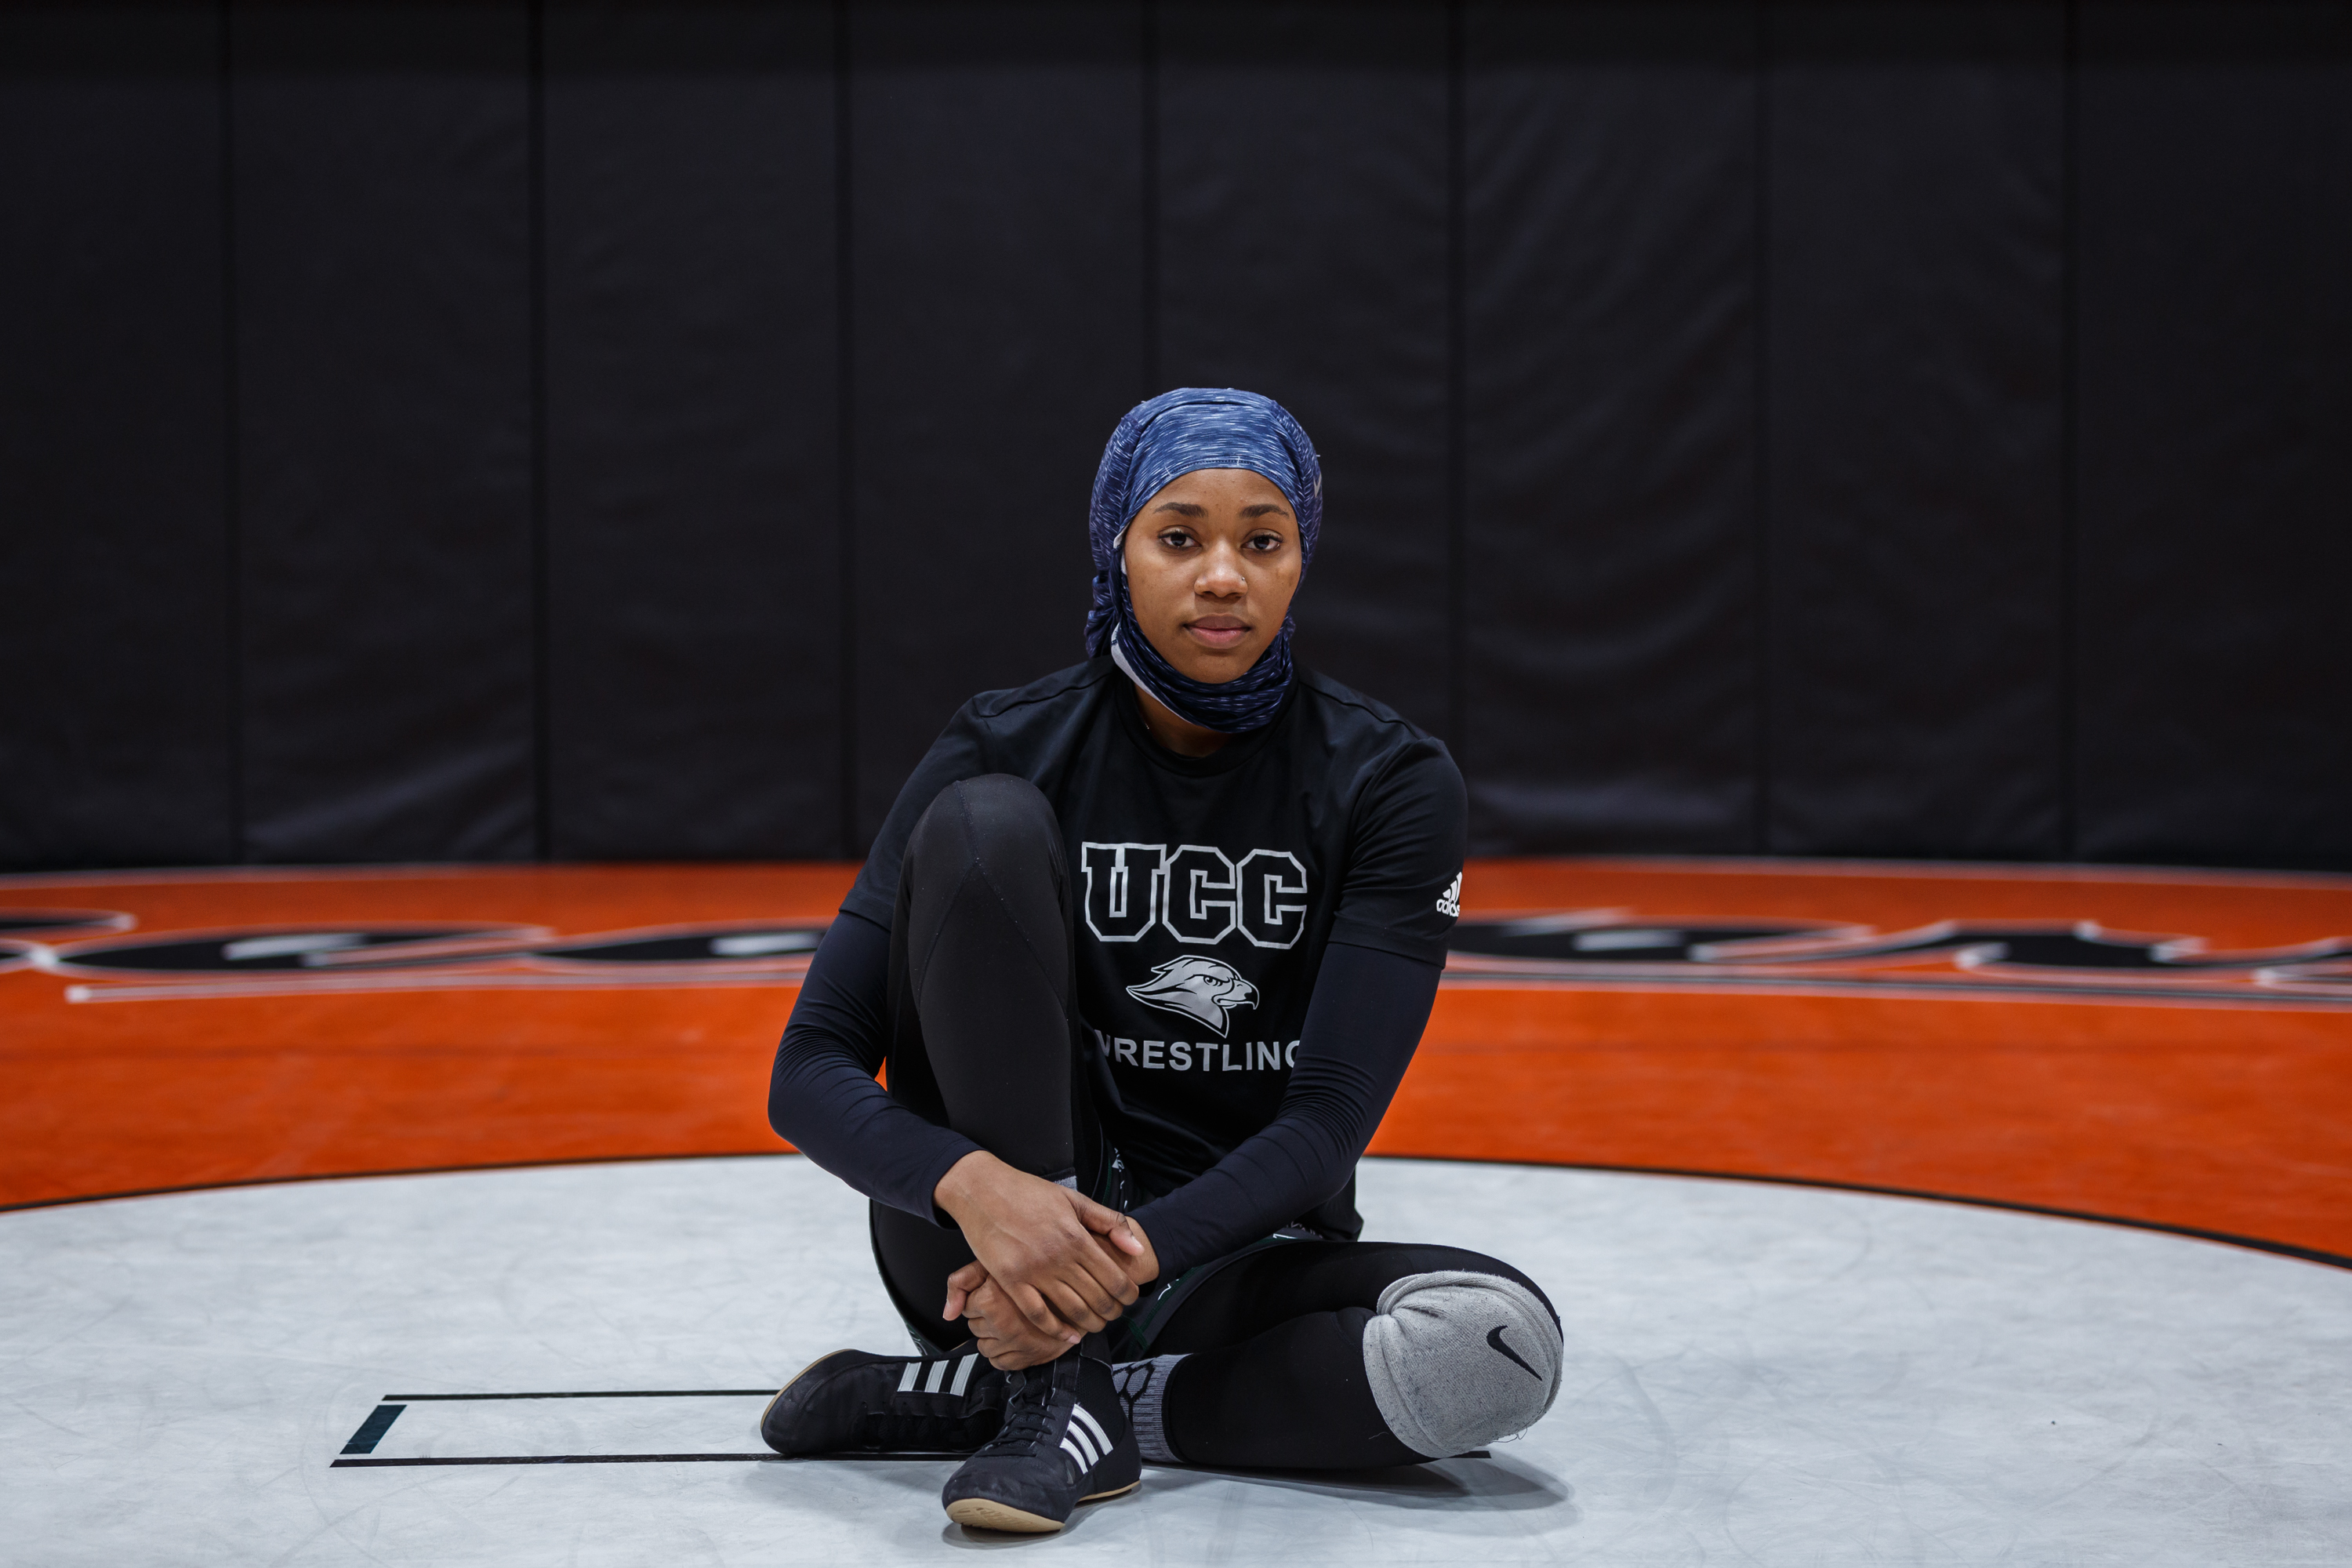 Muslim Women Wrestlers Say They Face Discrimination HuffPost Women image